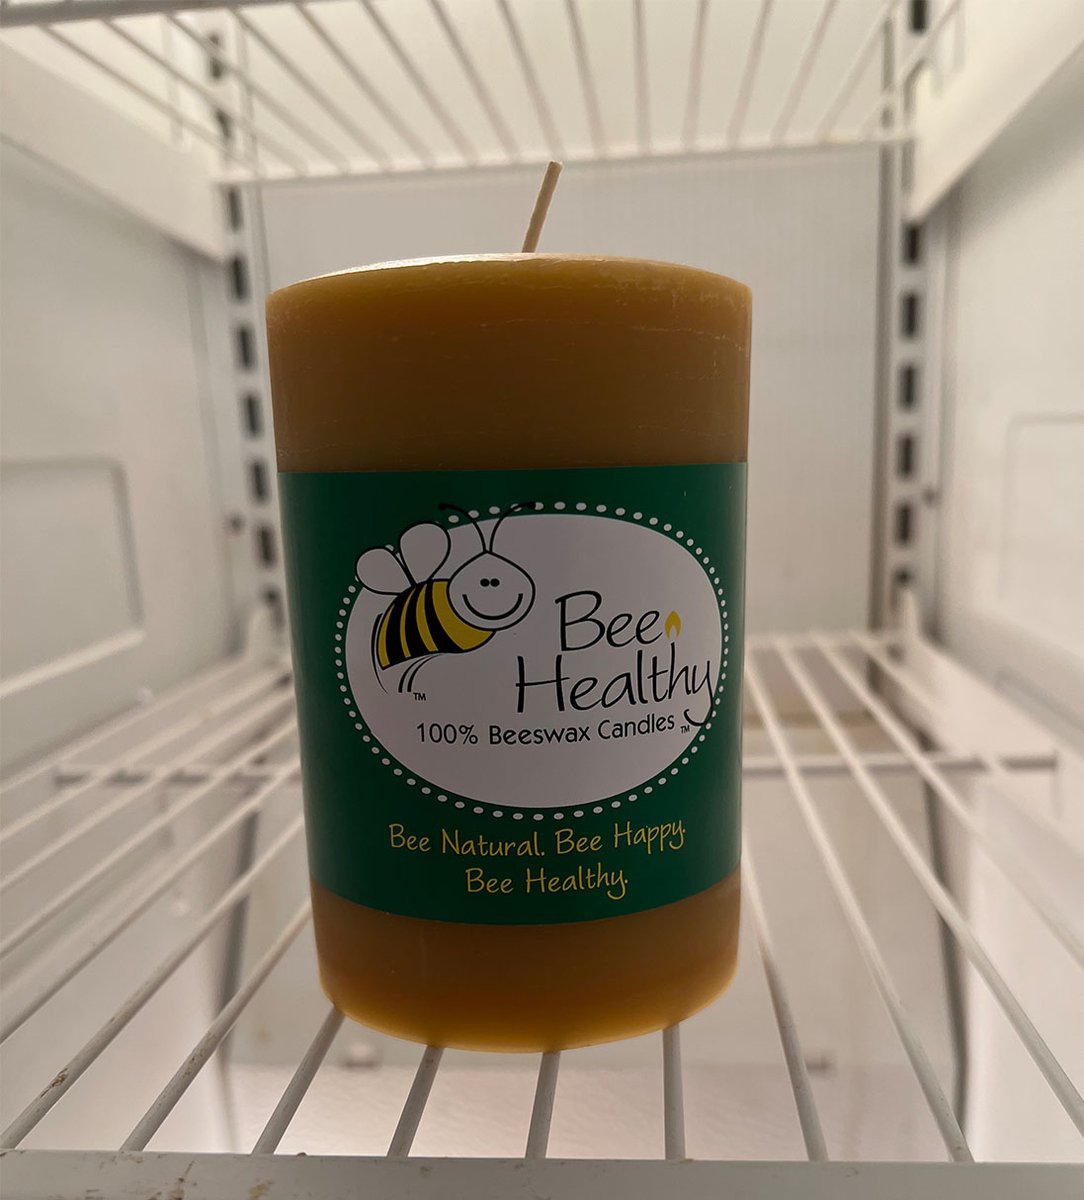 Do you ever put candles in the freezer to cool them or is it just me?

#beehealthycandles #beeswax #beeswaxcandles #beeswaxcandle #candles #familybusiness #candle #organiccandles #beehealthy #handmade #coloradocandles #coloradobeeswaxcandles #beautifulcandles #busybees